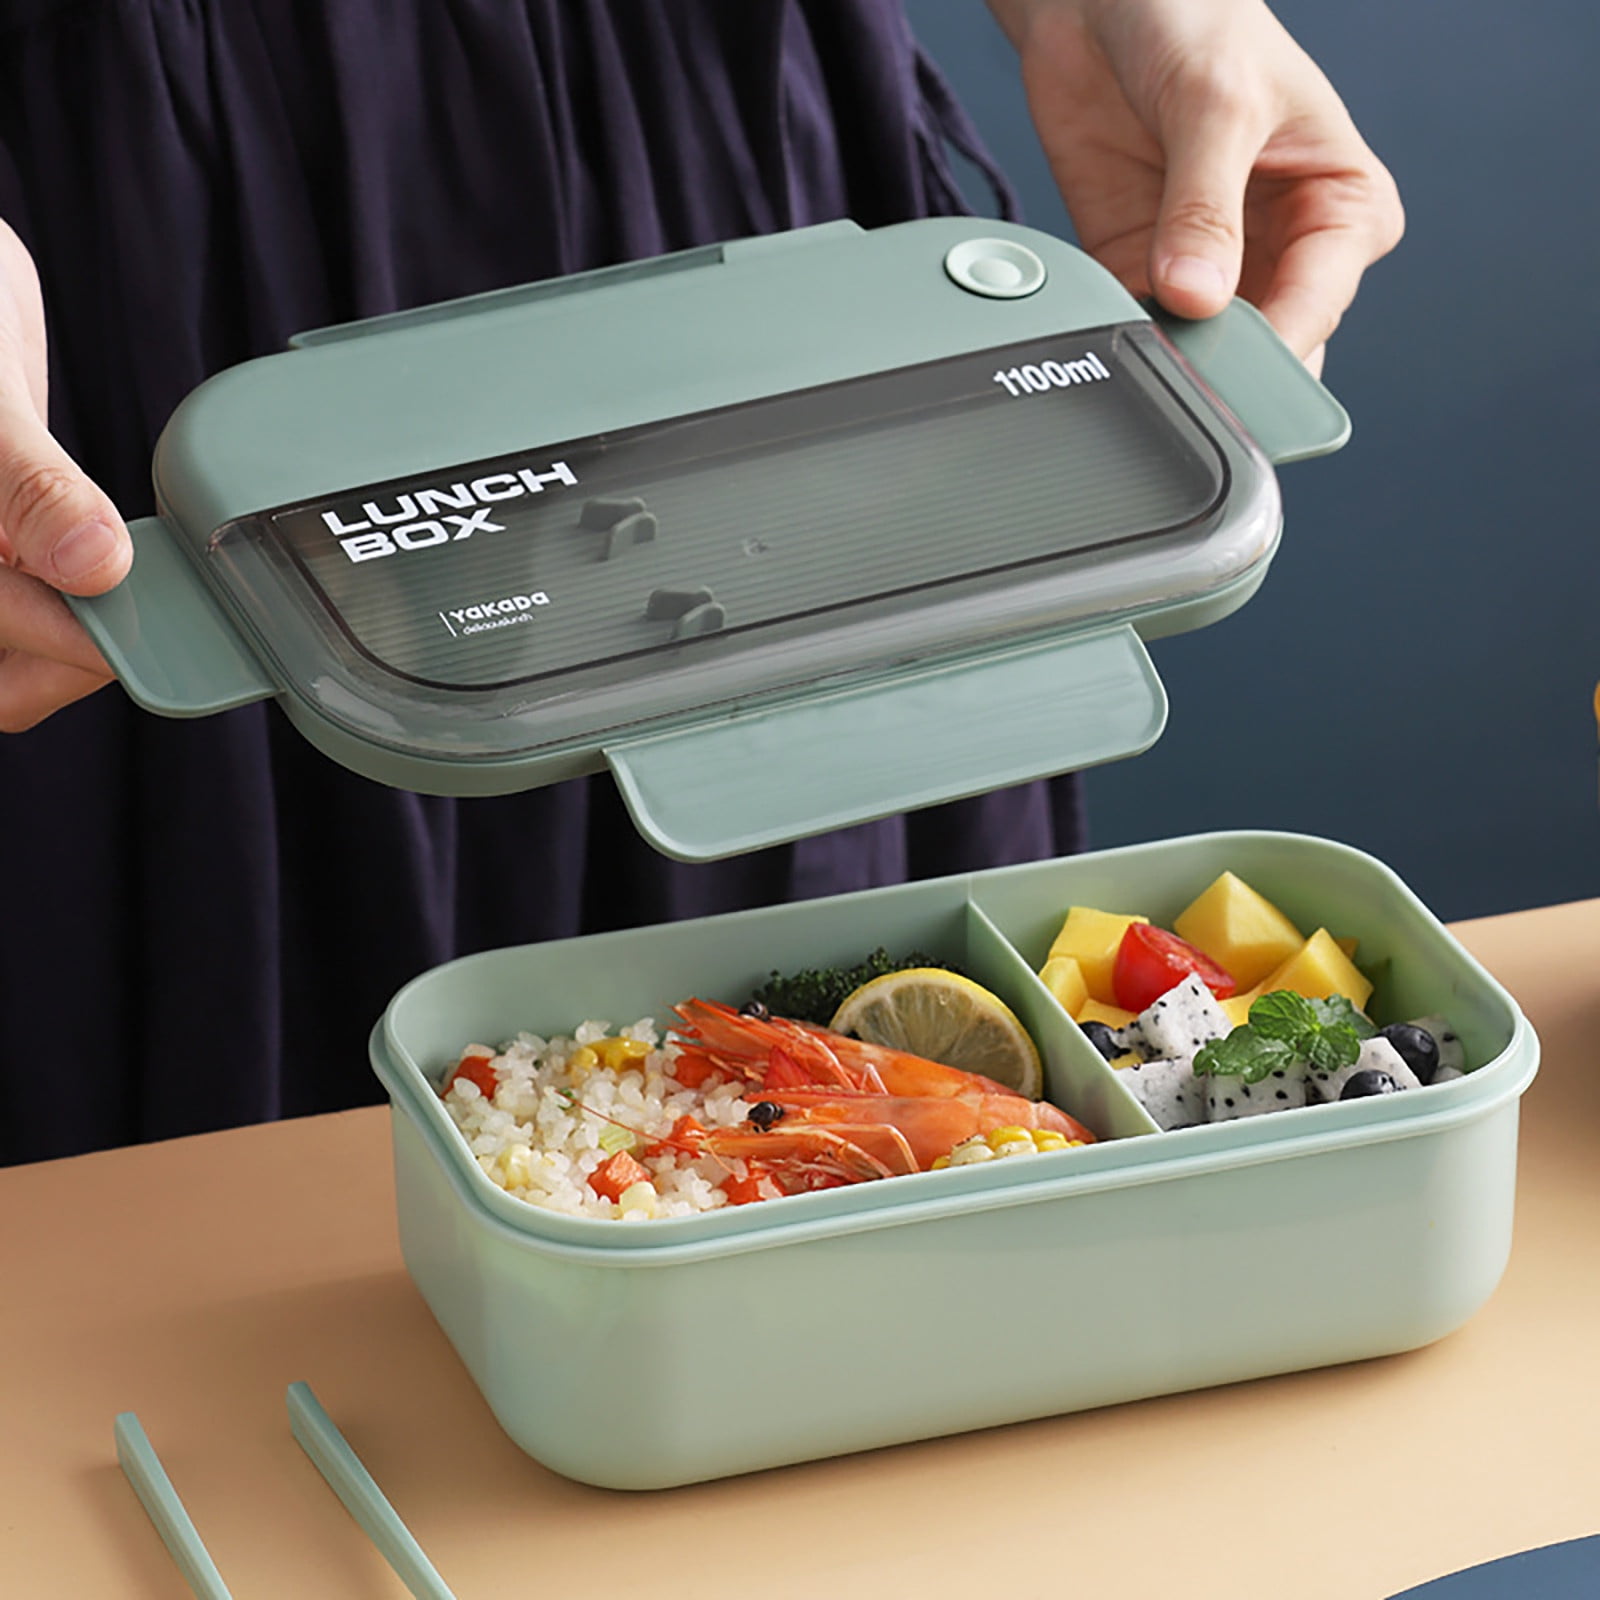 Caperci Classic Bento Box Adult Lunch Box for Older Kids - Leakpoof 47 oz  3-Compartment Lunch Containers for Adults and Teens, Built-in Utensil Set,  Ideal for On-the-Go Balanced Eating, Green - Yahoo